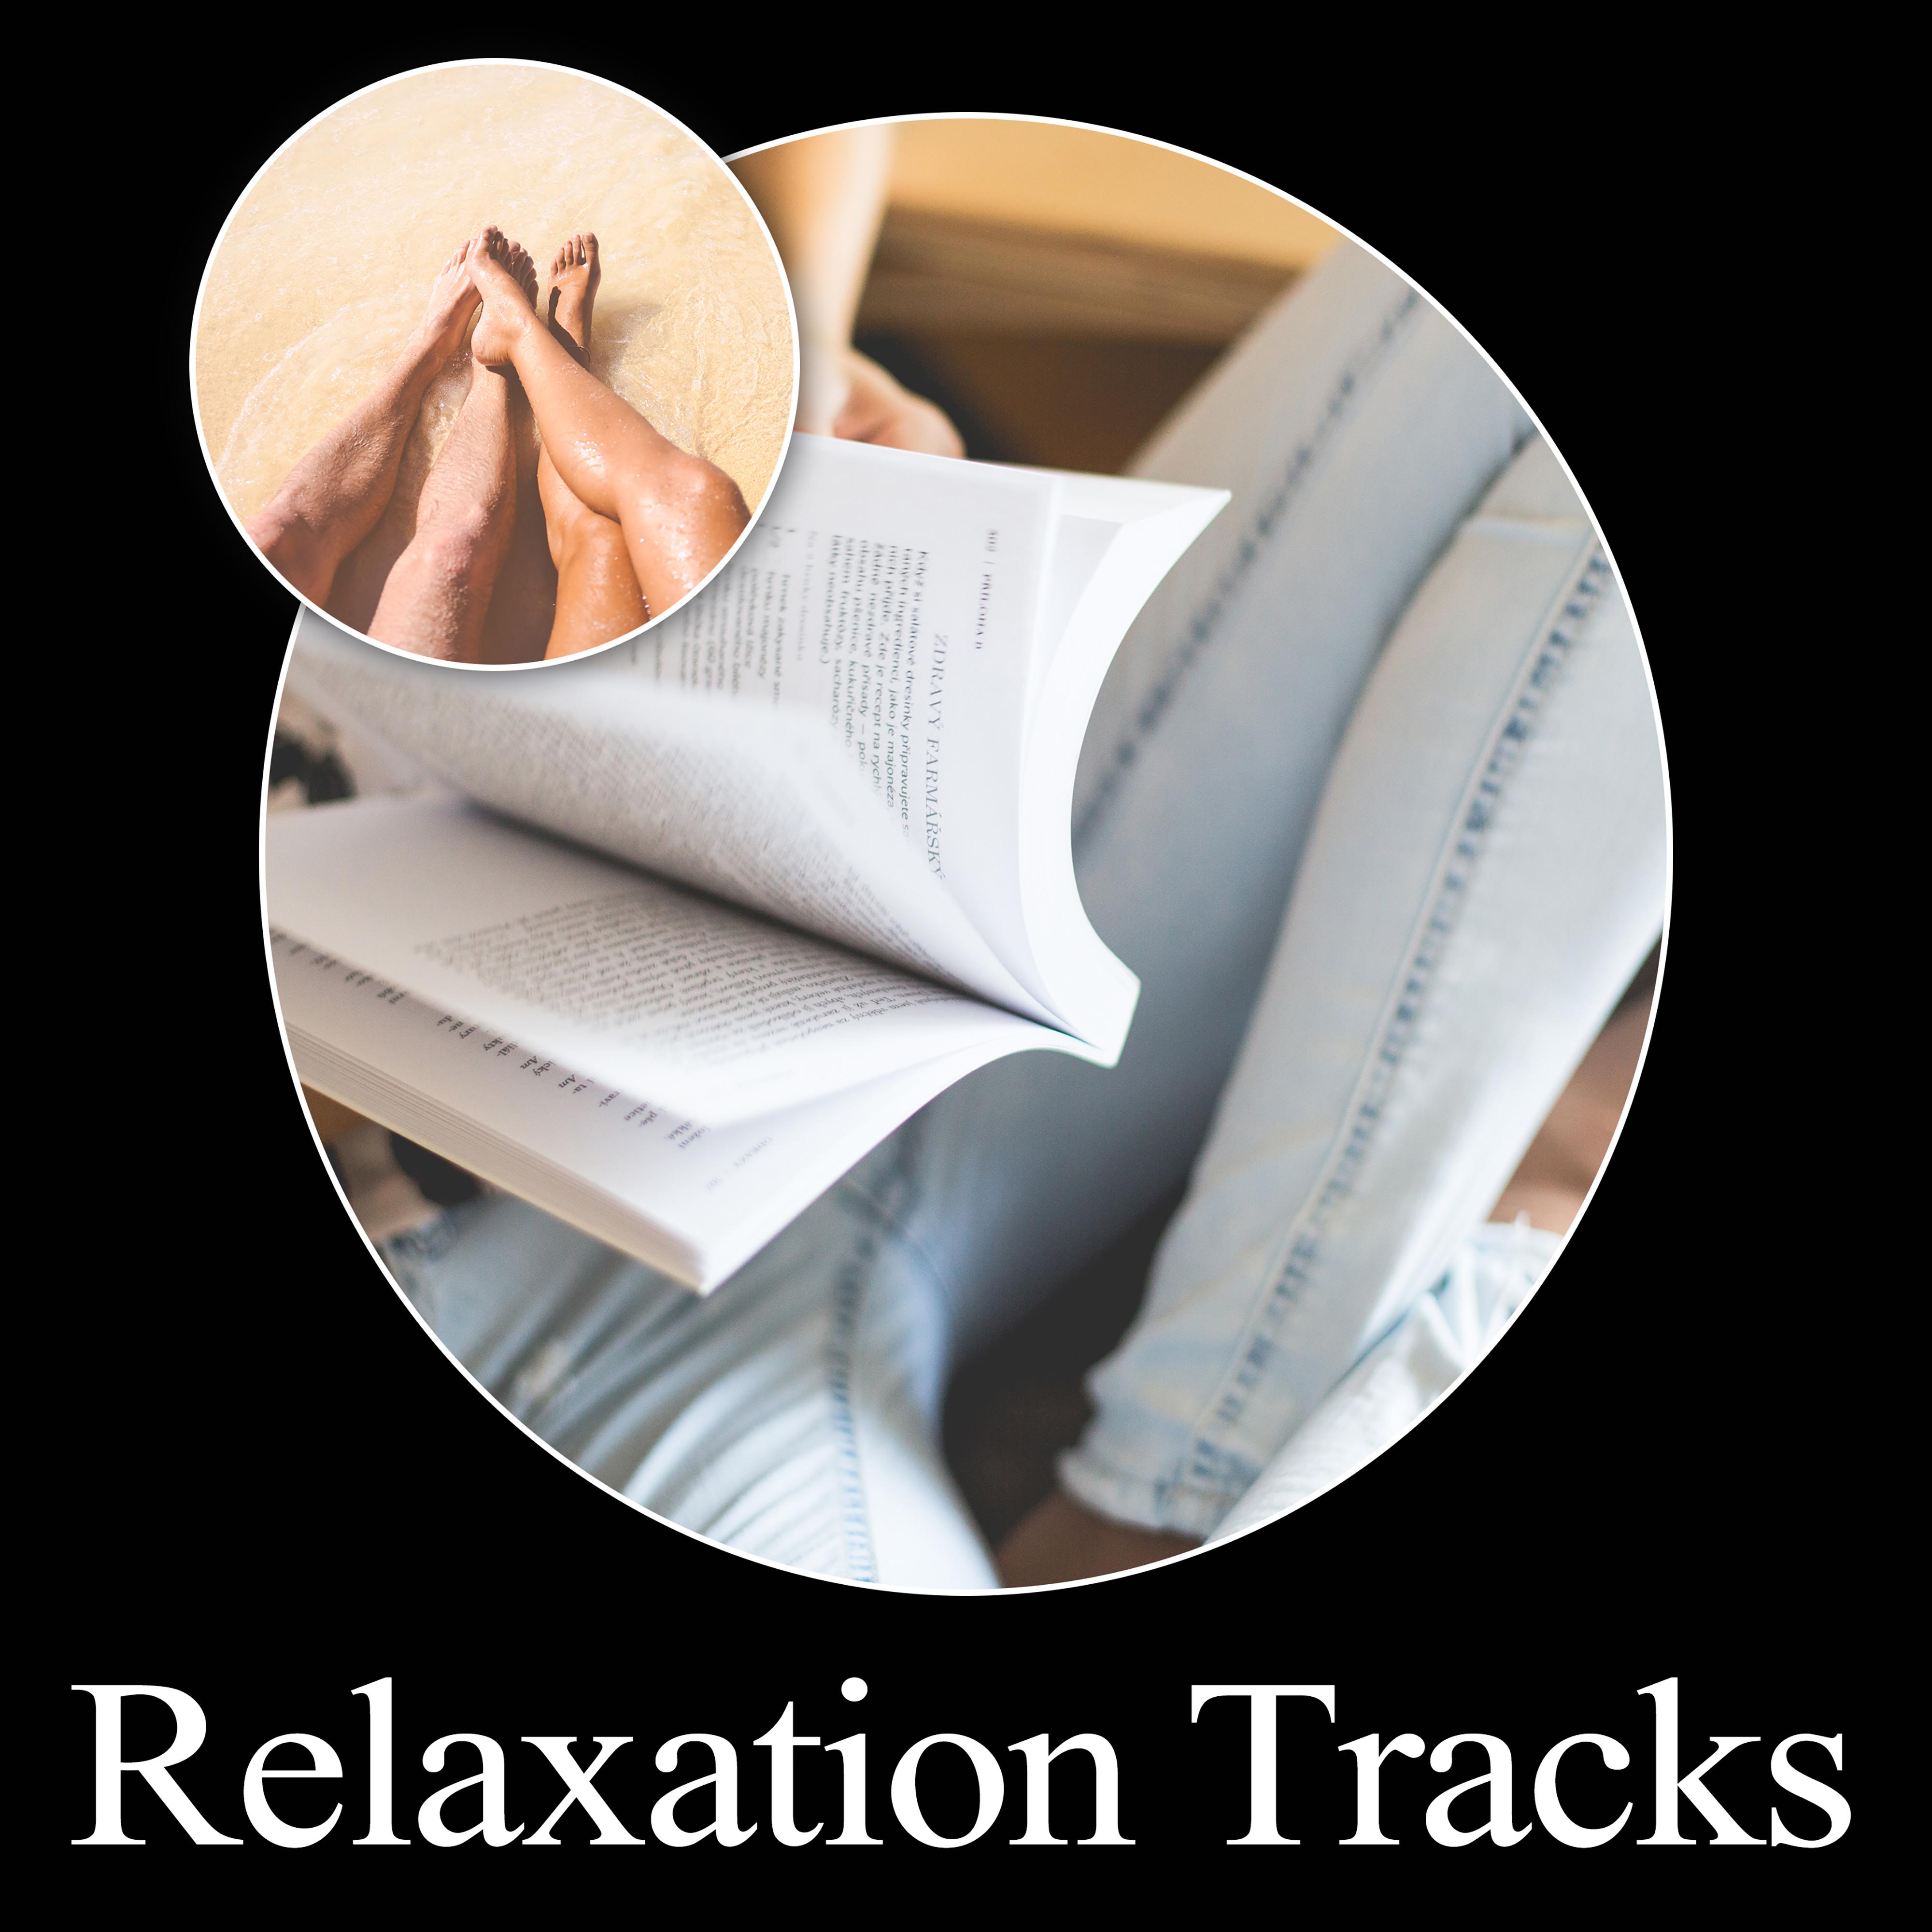 Relaxation Tracks  Pure Rest, Asian Flute, Meditation Deep Zen, Reiki, Spa, New Age, Ambience